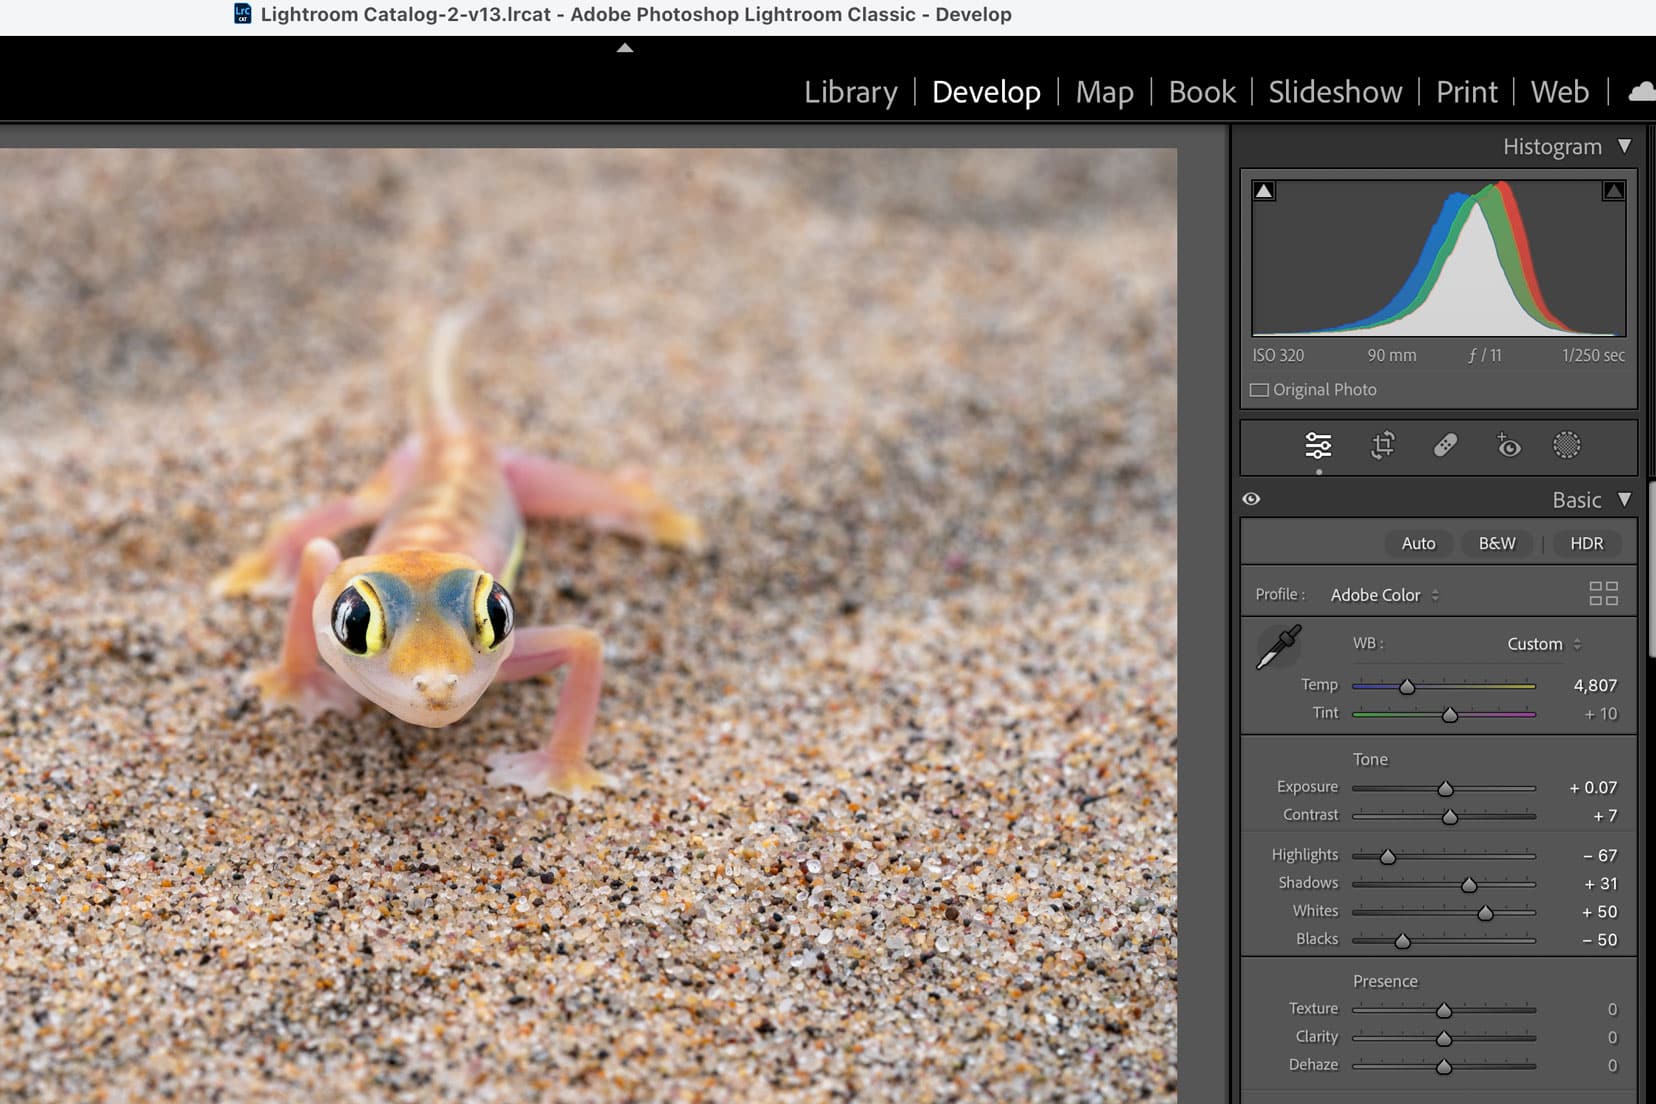 lightroom display with a photo of a salamander